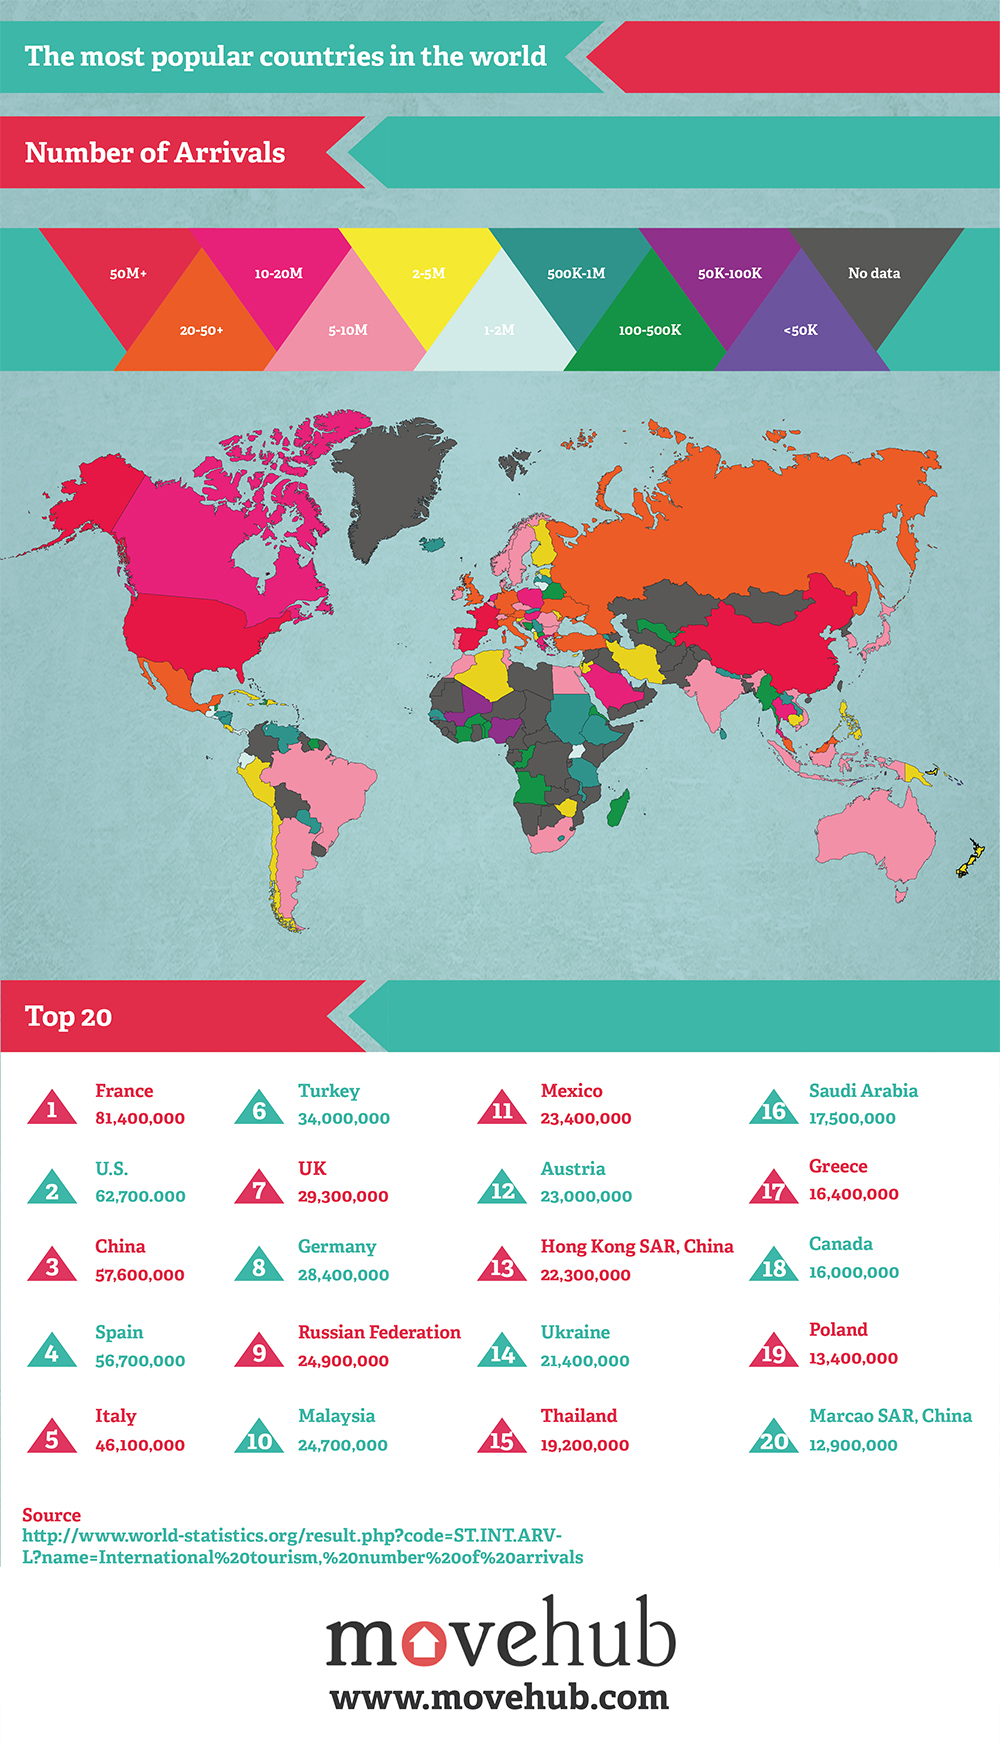 Most popular destinations in the world to visit.